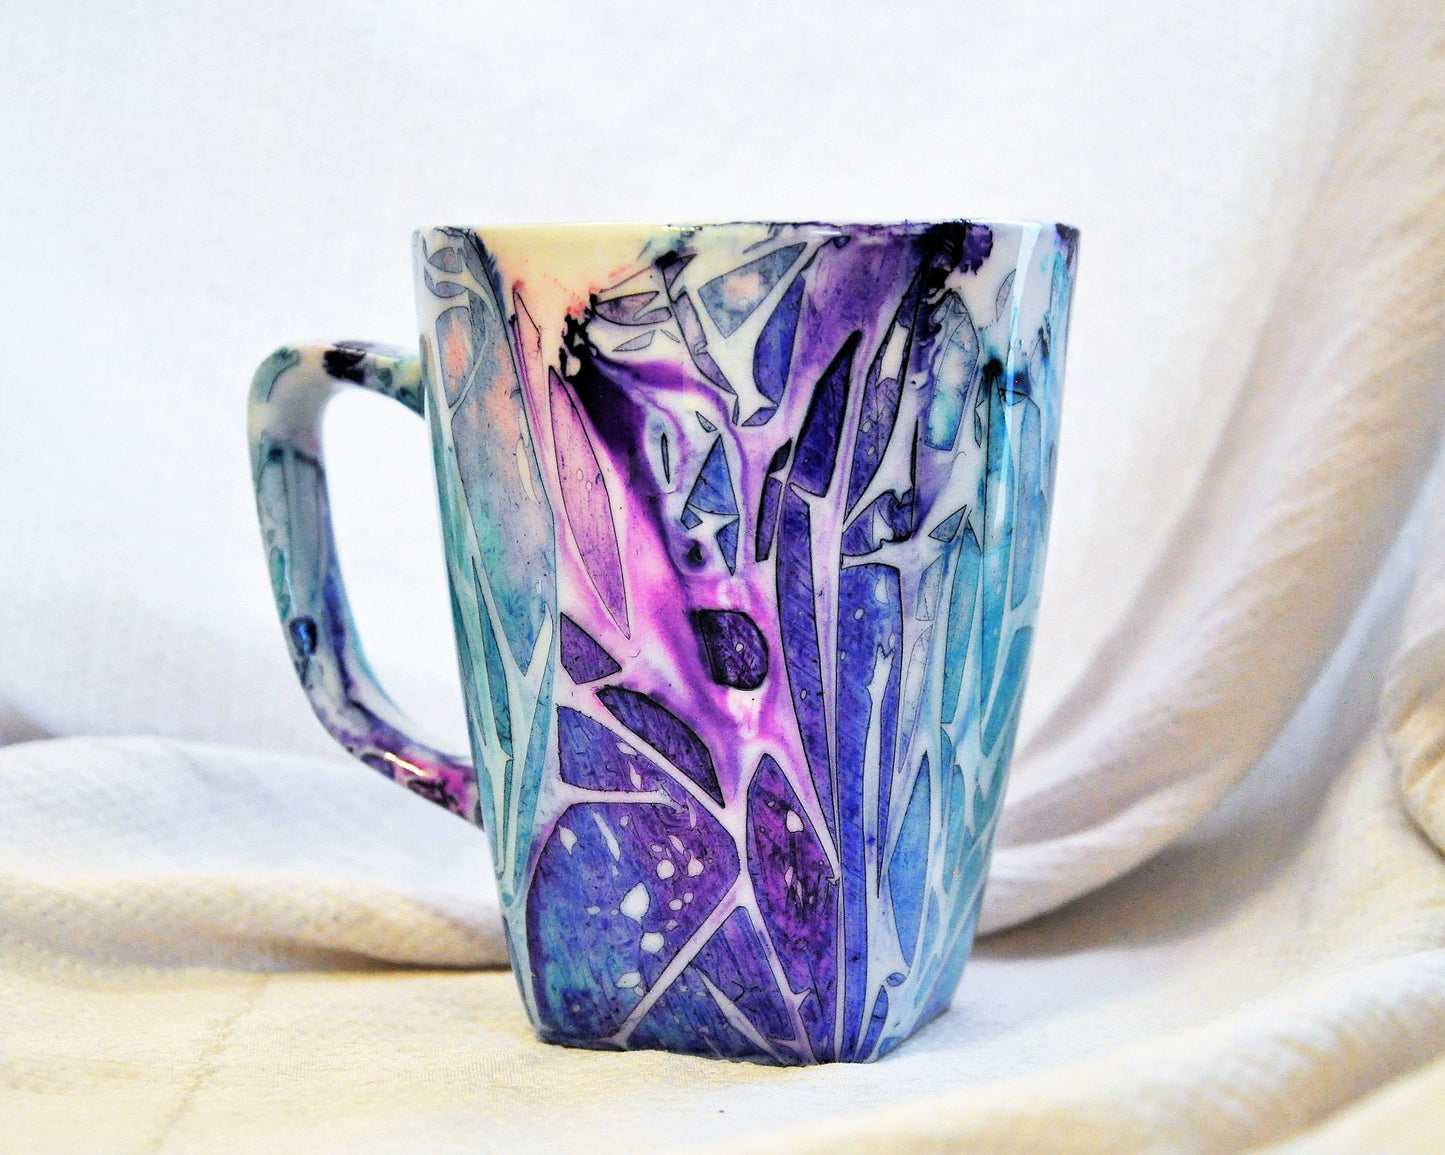 Blue and Purple Abstract Alcohol Ink 12 oz Ceramic Coffee Mug, Handpainted and Sealed with Resin, One of a Kind, Unique